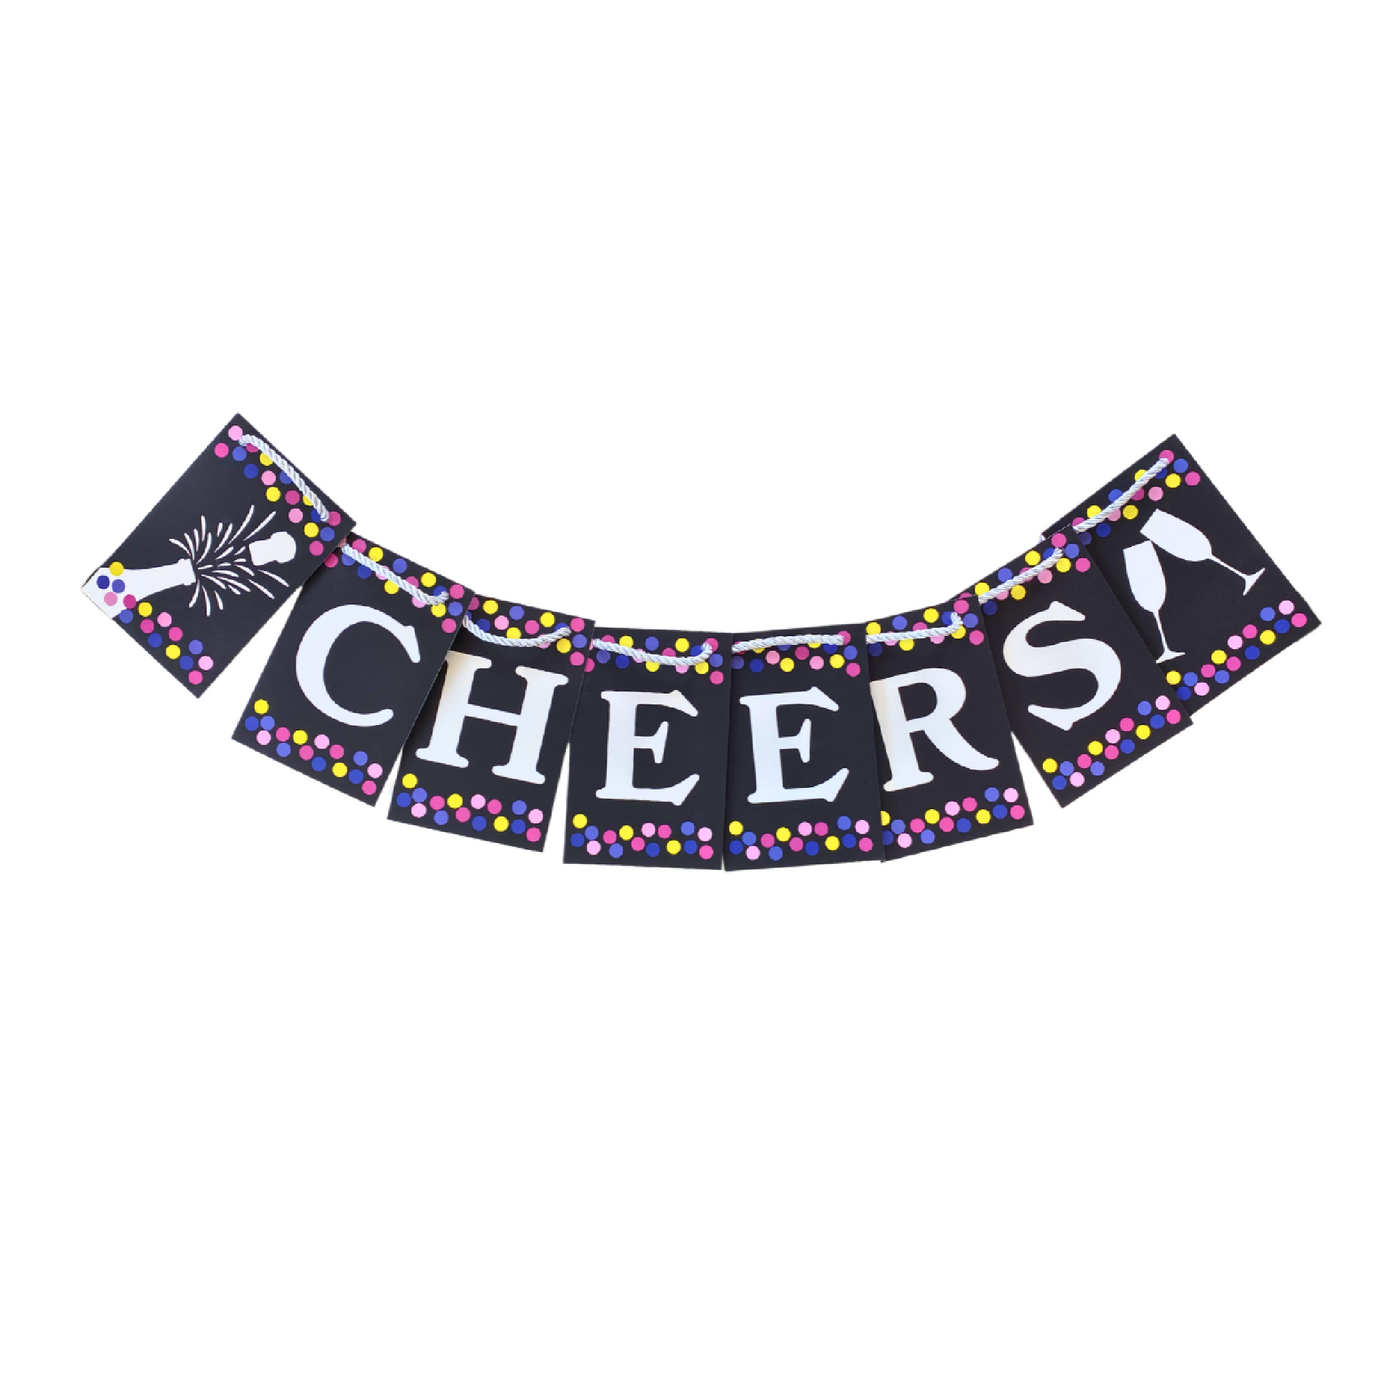 Cheers banner